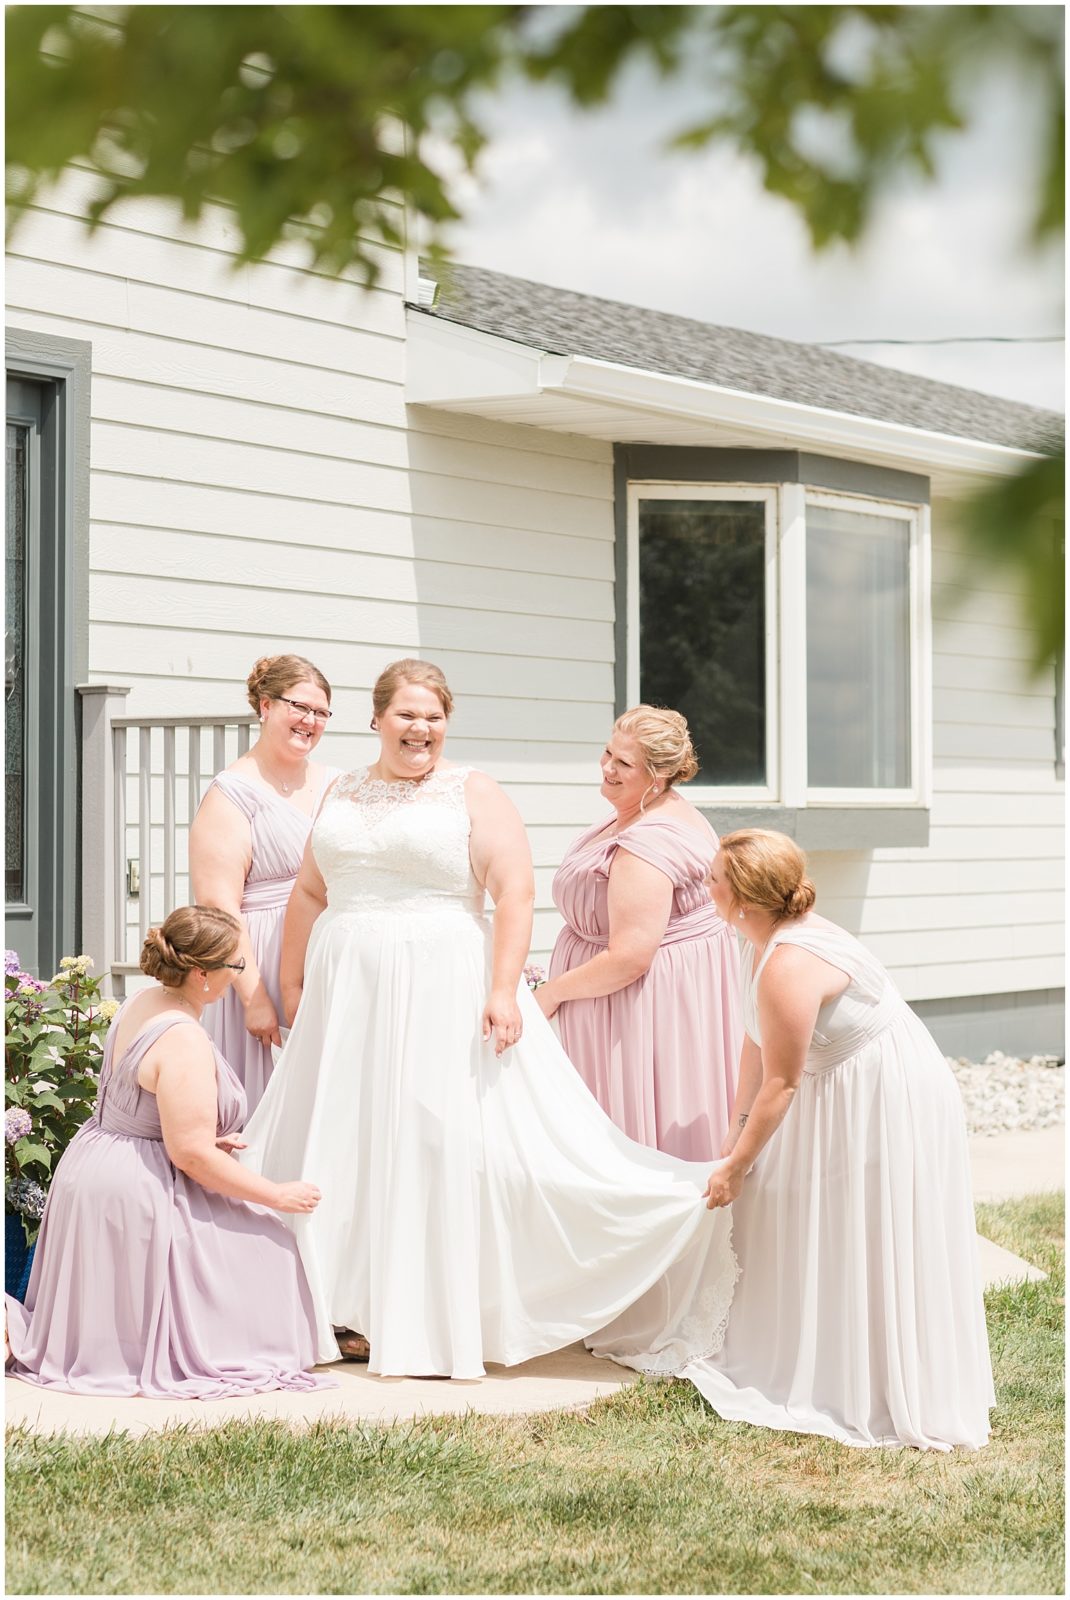 Bride's First Look with her Father | Wedding in Spencer, Iowa shot by Jessica Brees Photography